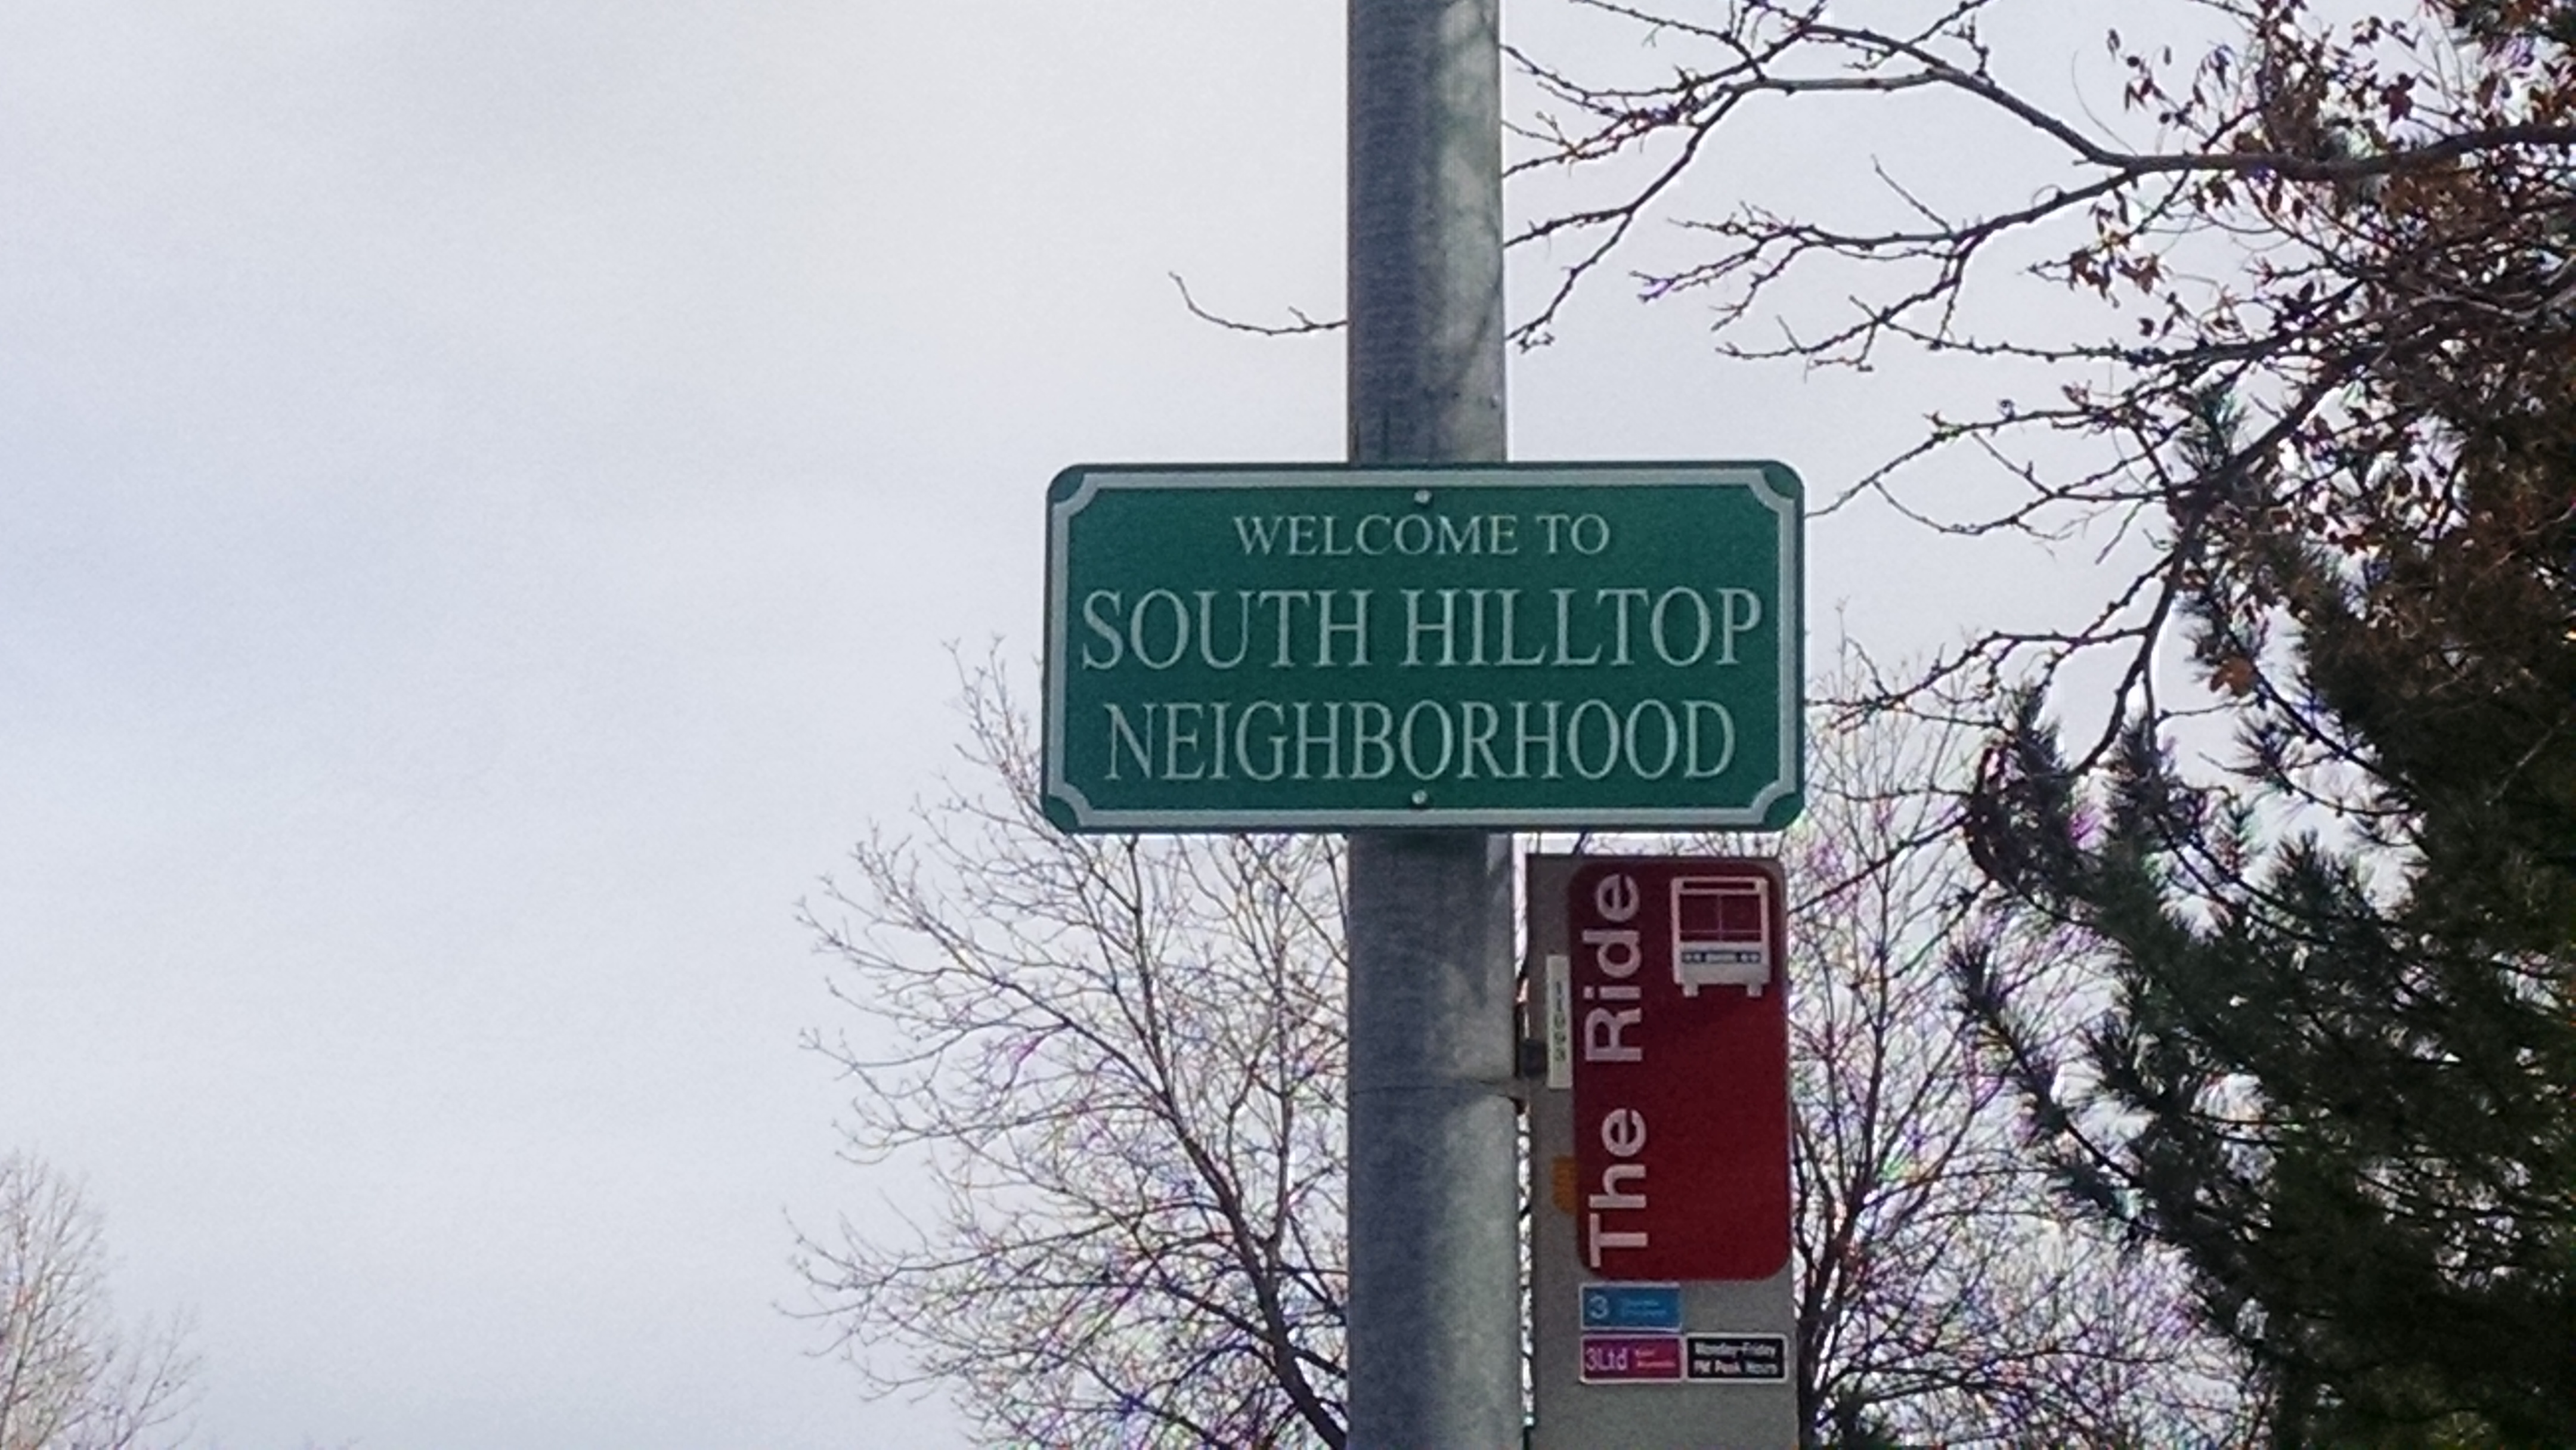 Do residents have to join neighborhood associations?